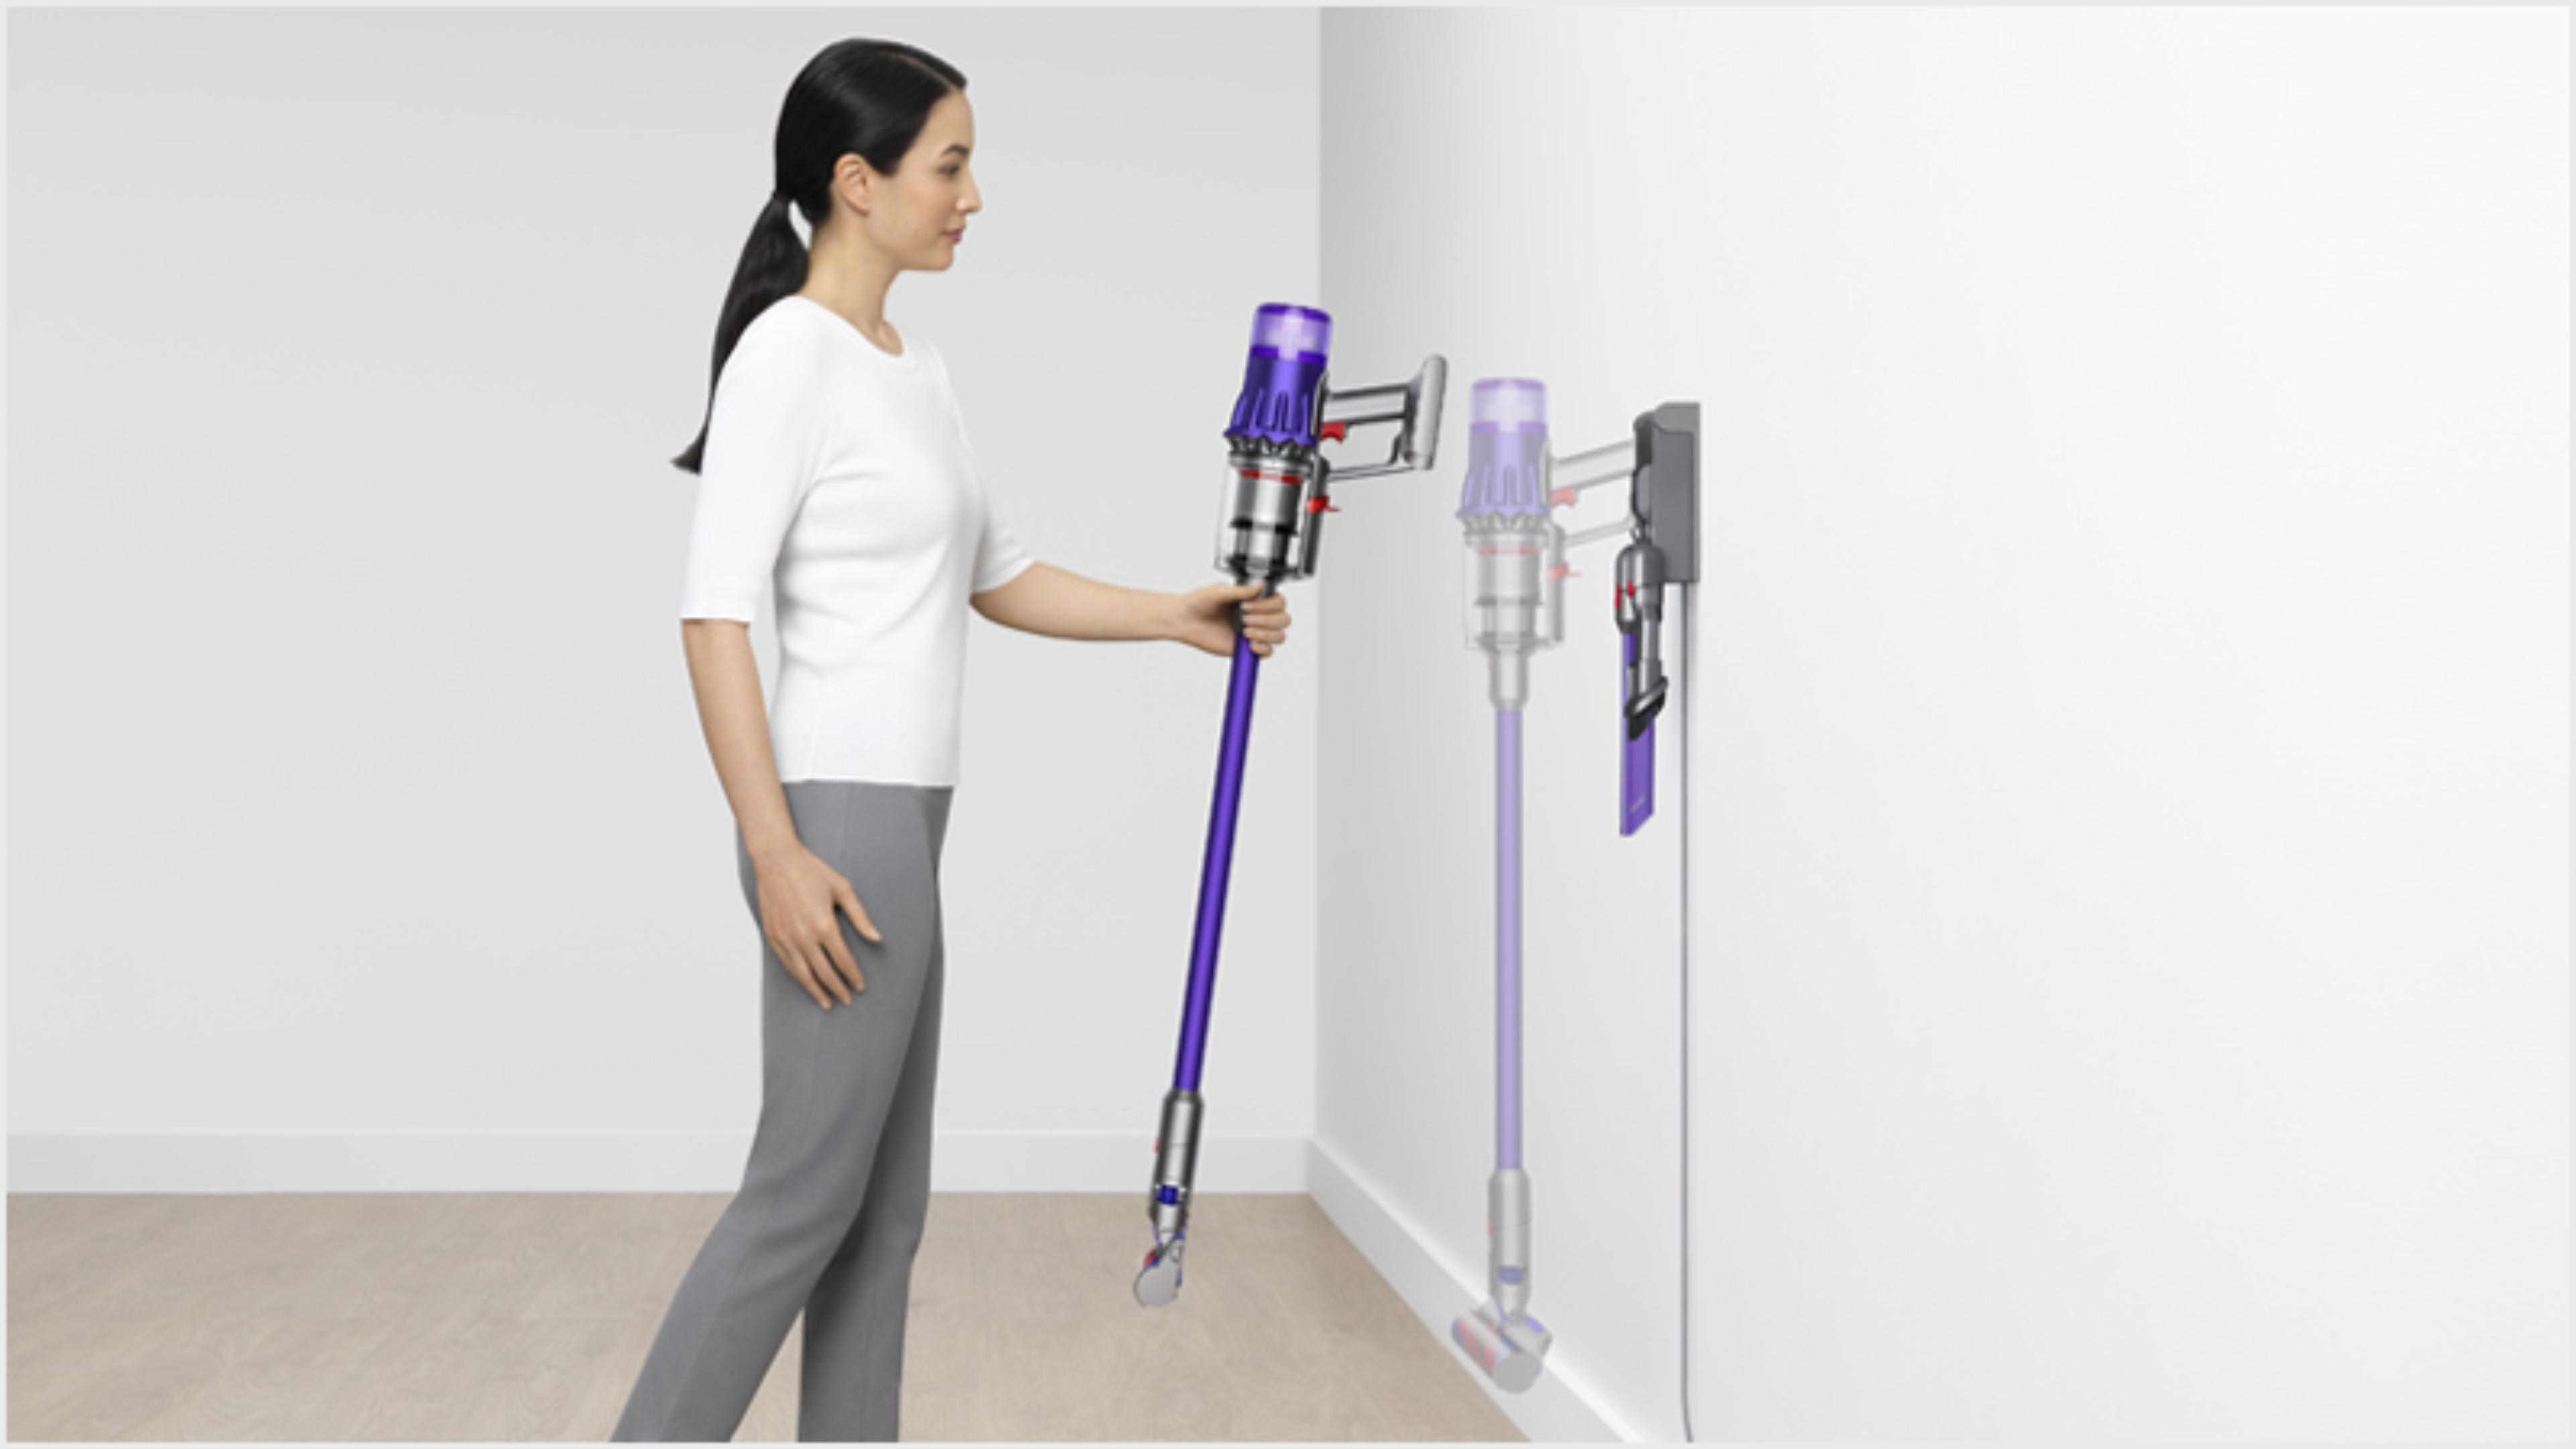 Woman dropping the Dyson Digital Slim vacuum into the wall dock